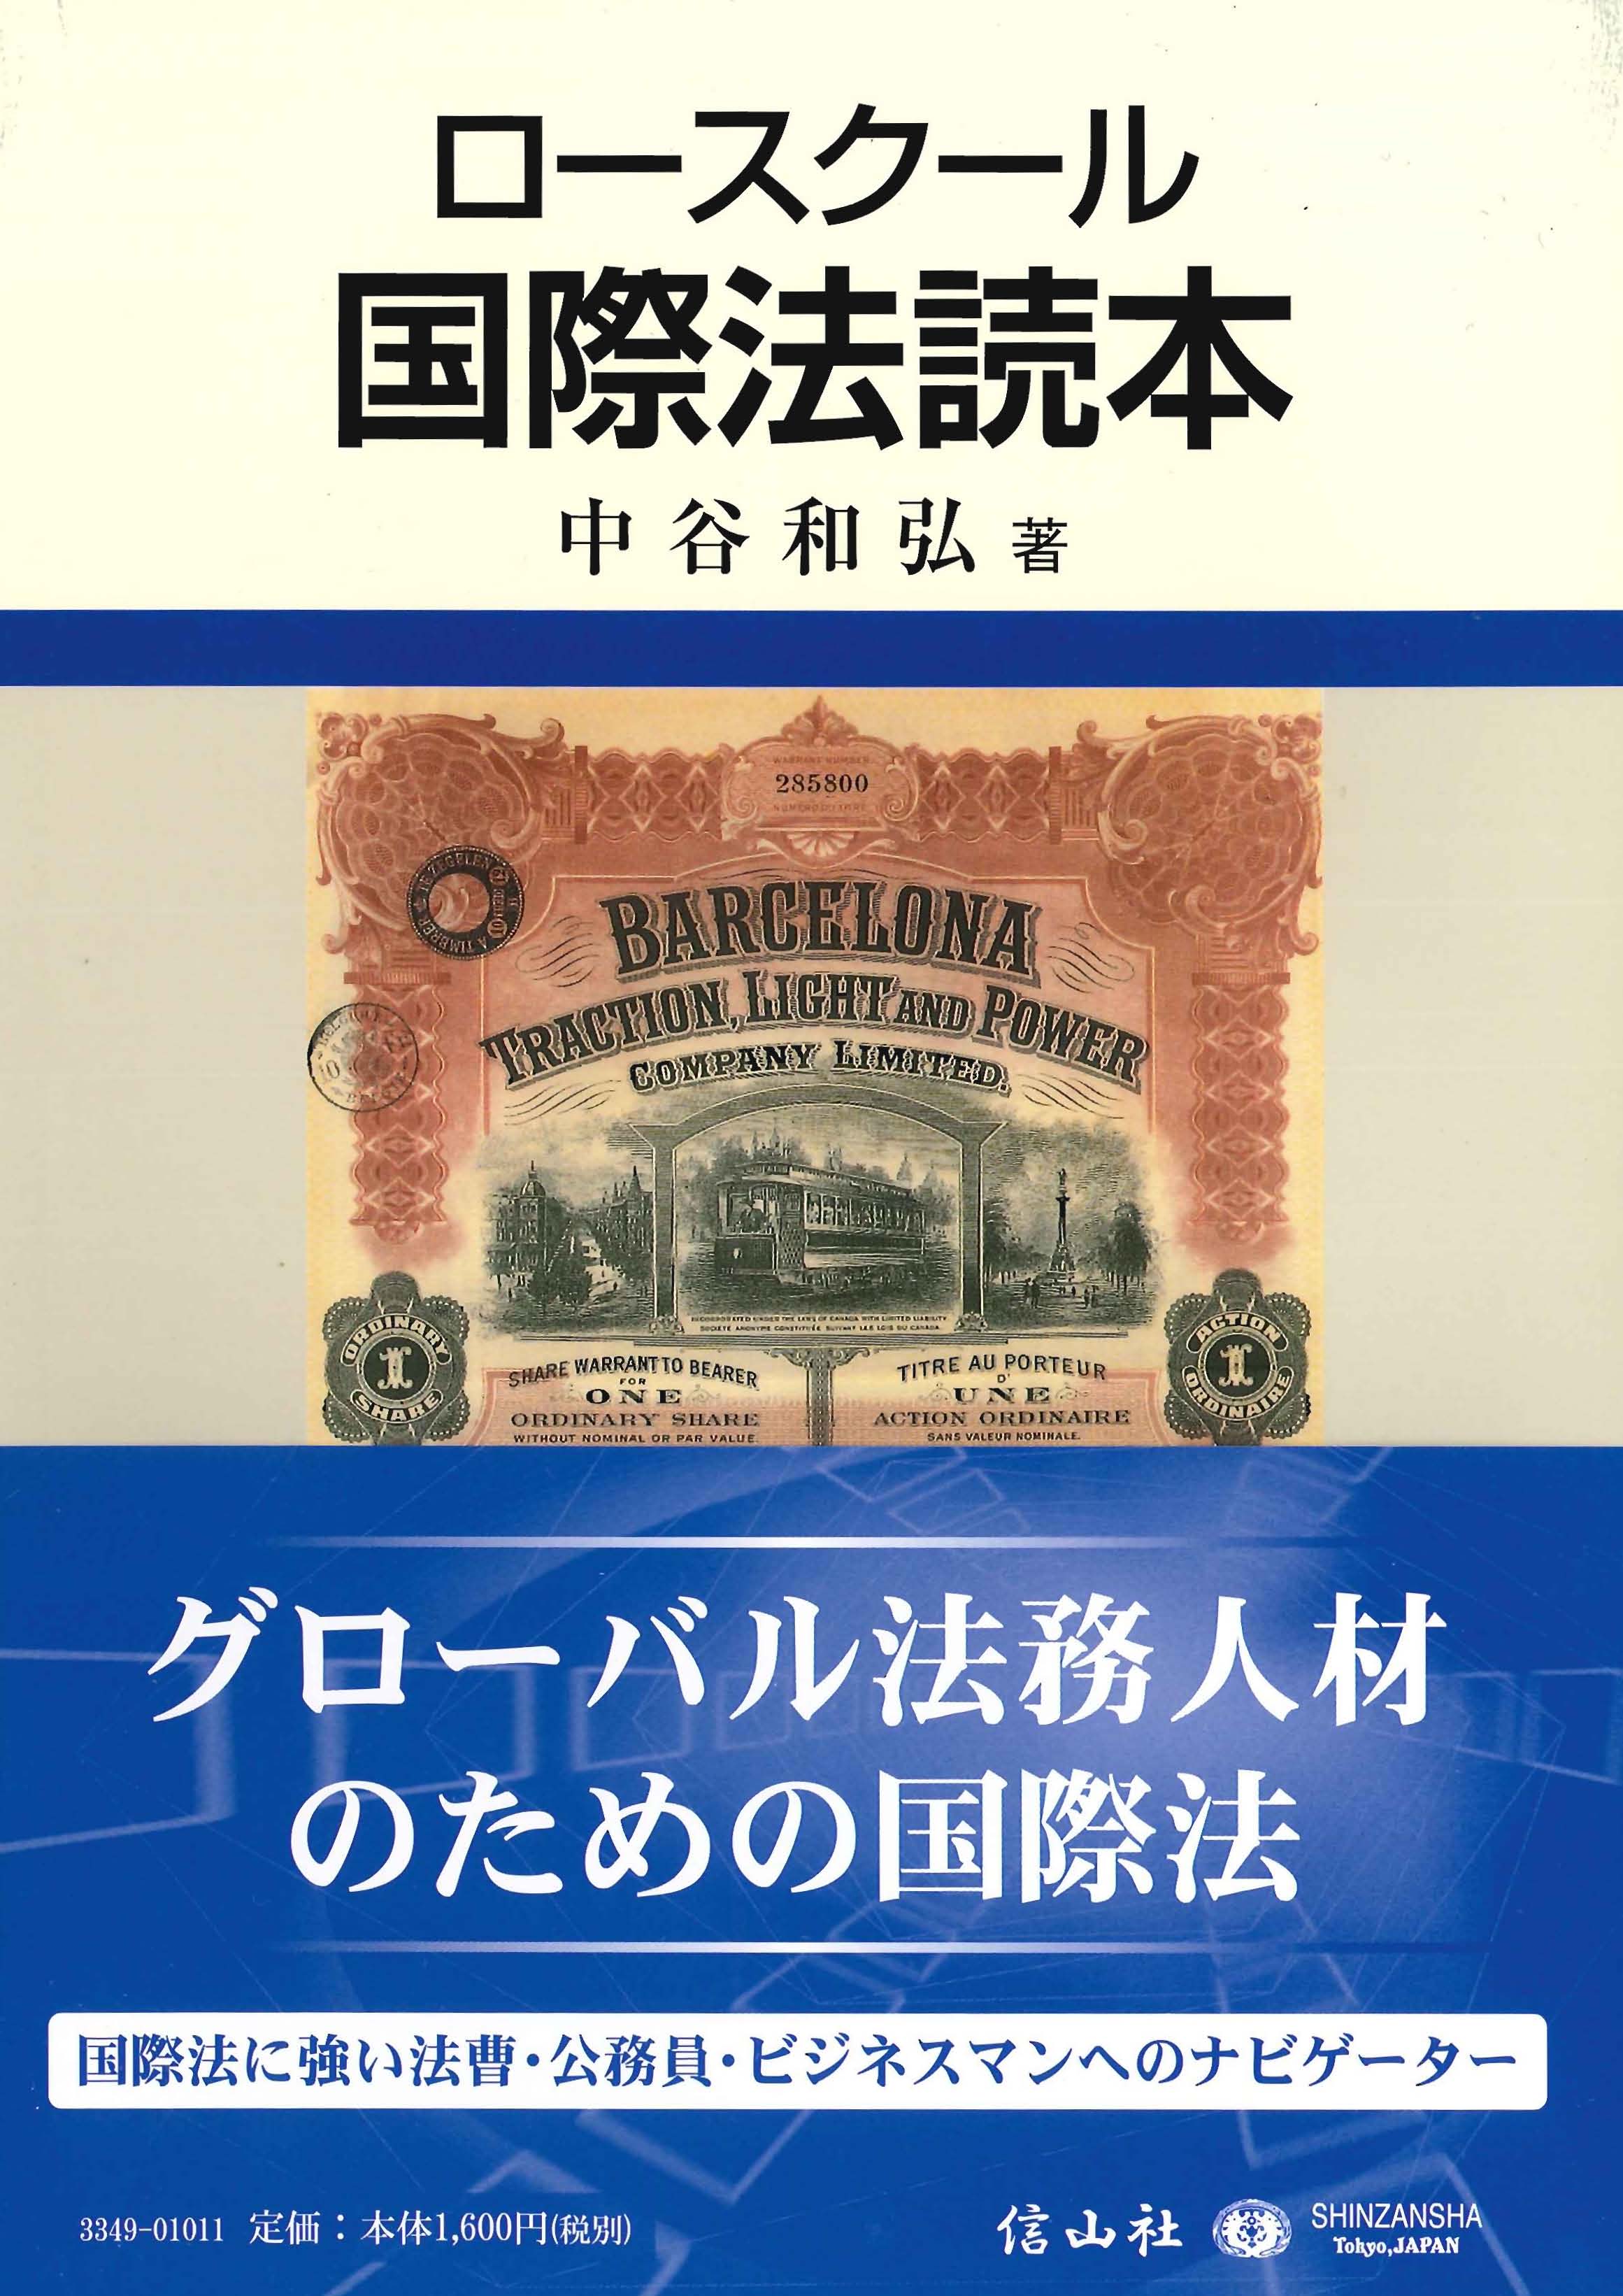 Image of the Barcelona Traction case in the center of the cover.